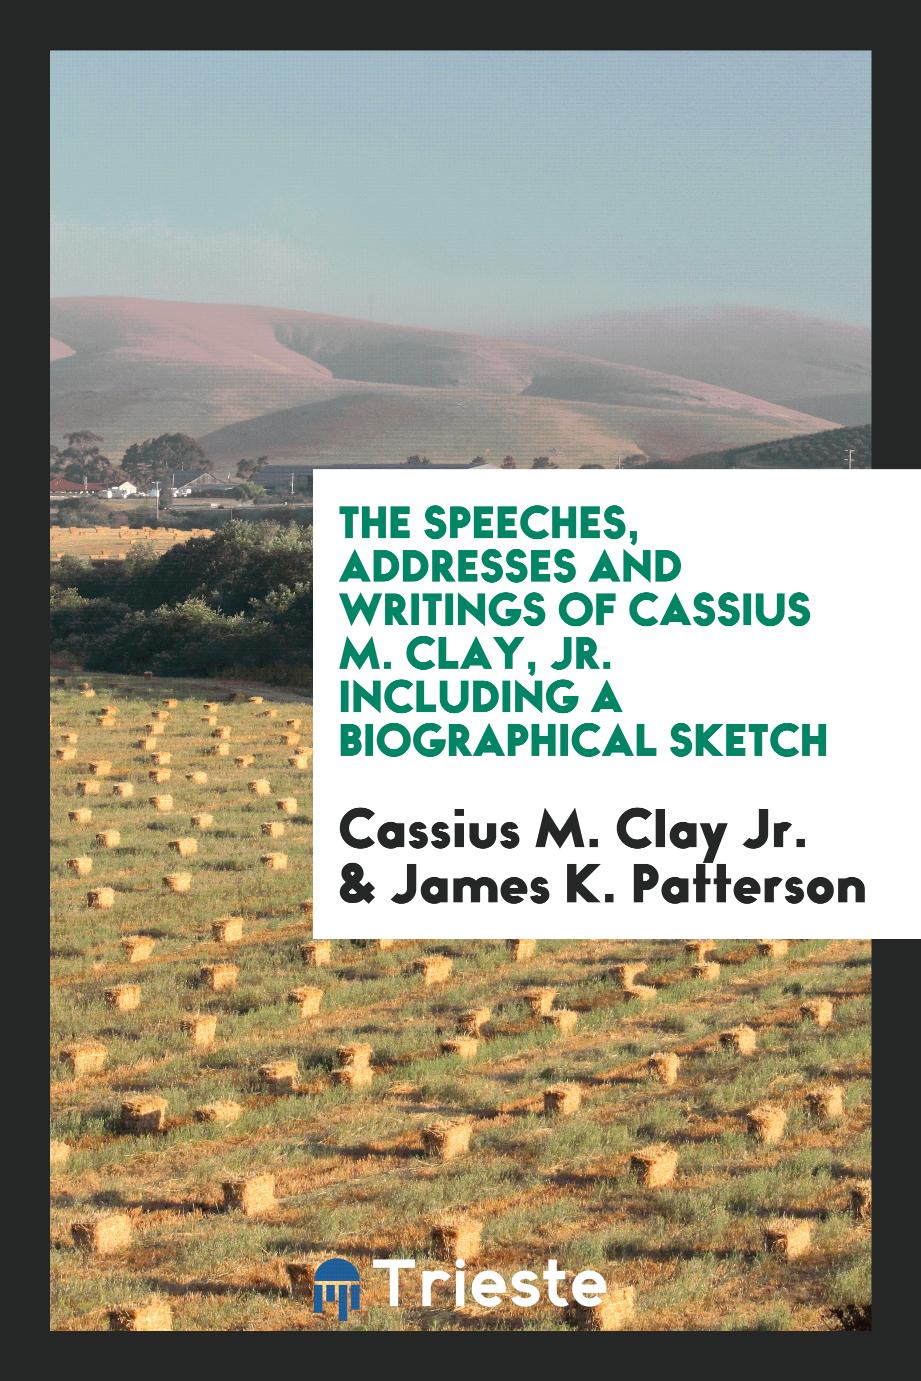 The Speeches, Addresses and Writings of Cassius M. Clay, Jr. Including a Biographical Sketch